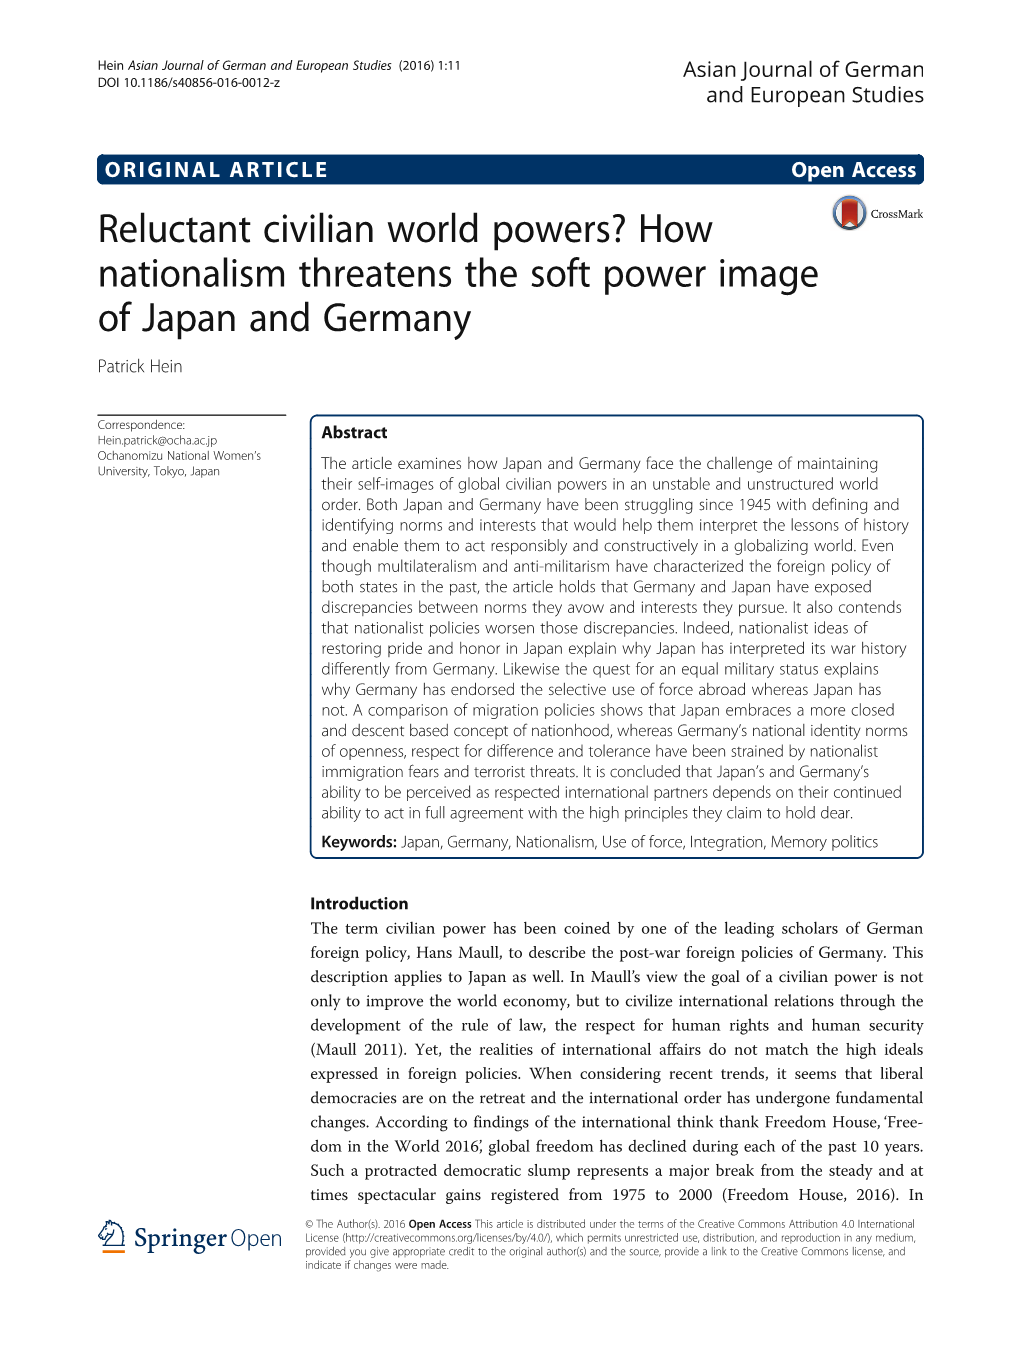 How Nationalism Threatens the Soft Power Image of Japan and Germany Patrick Hein